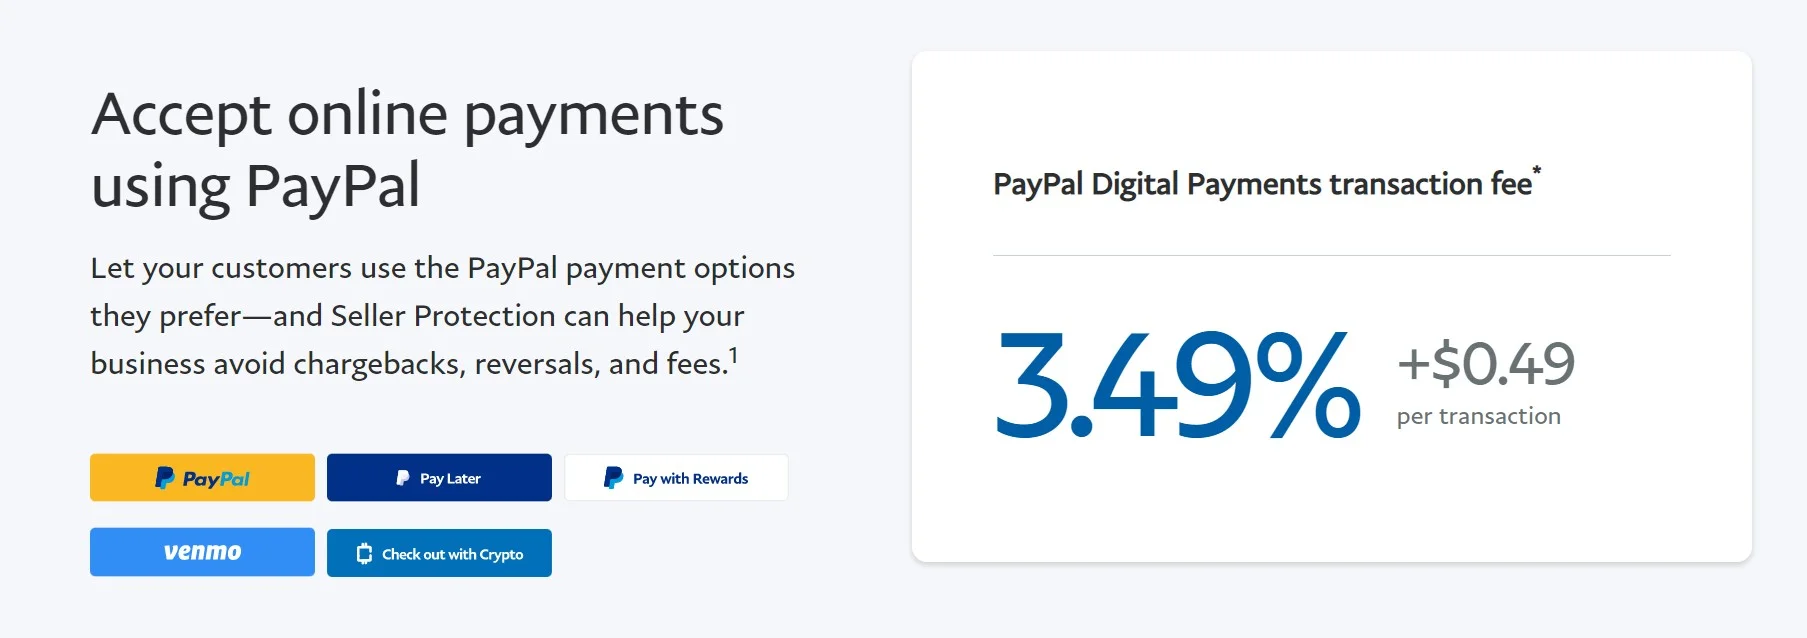 PayPal pricing